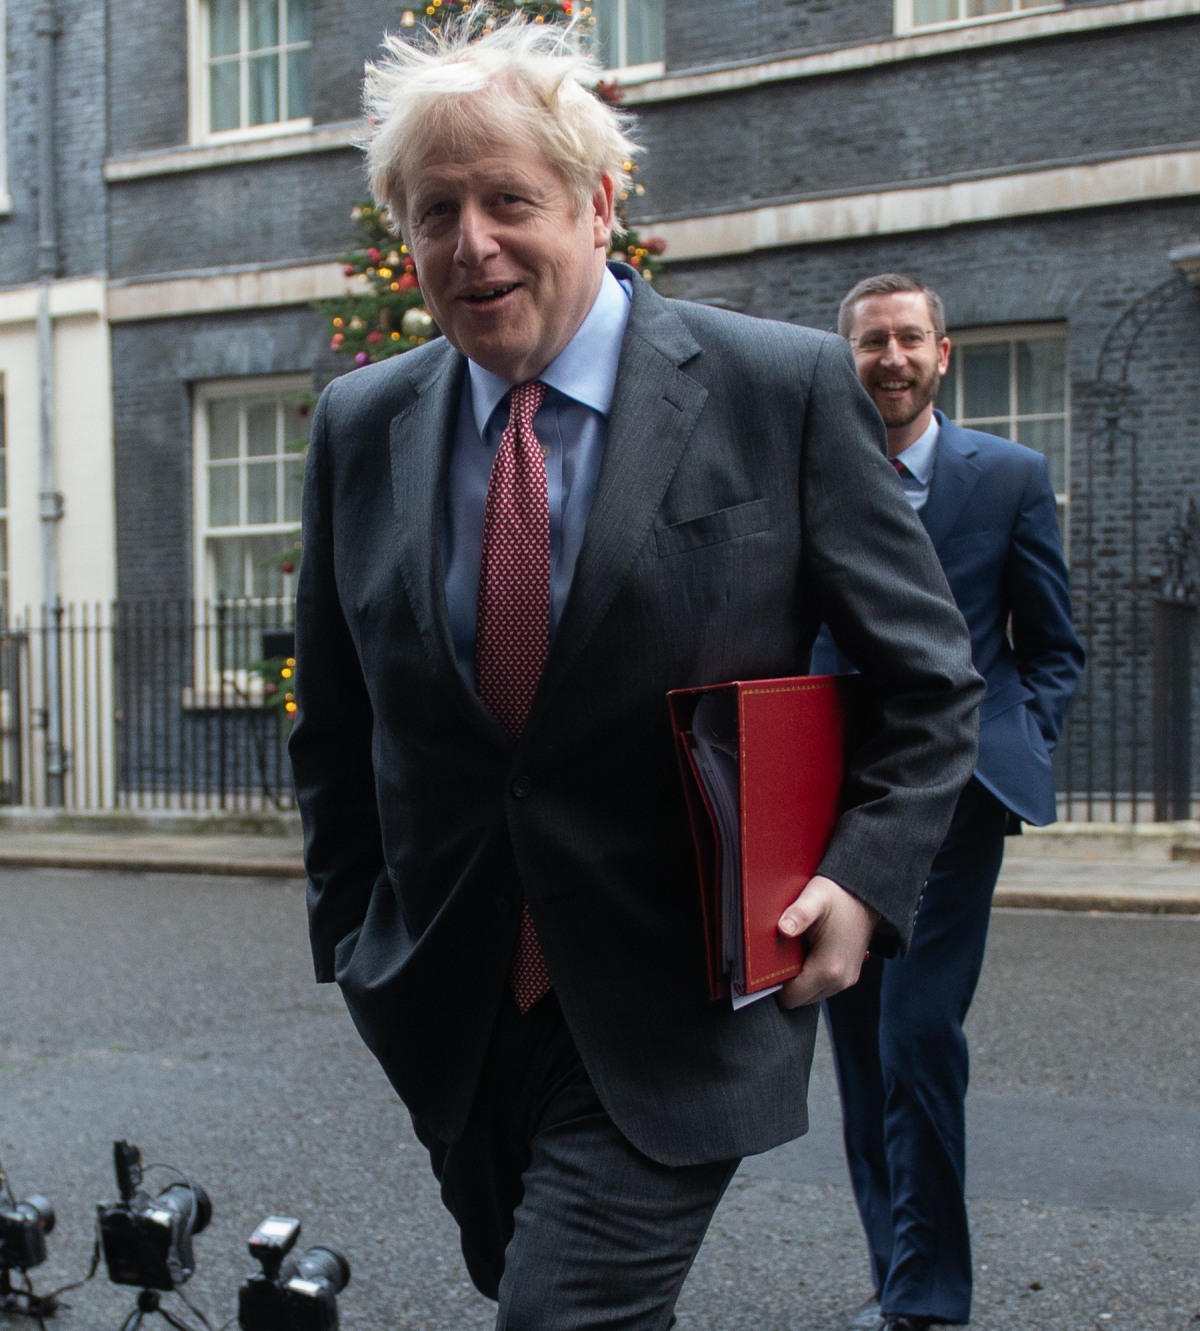 Cabinet Meeting Arrivals -  Tuesday 8 December 2020 - Downing Street, London